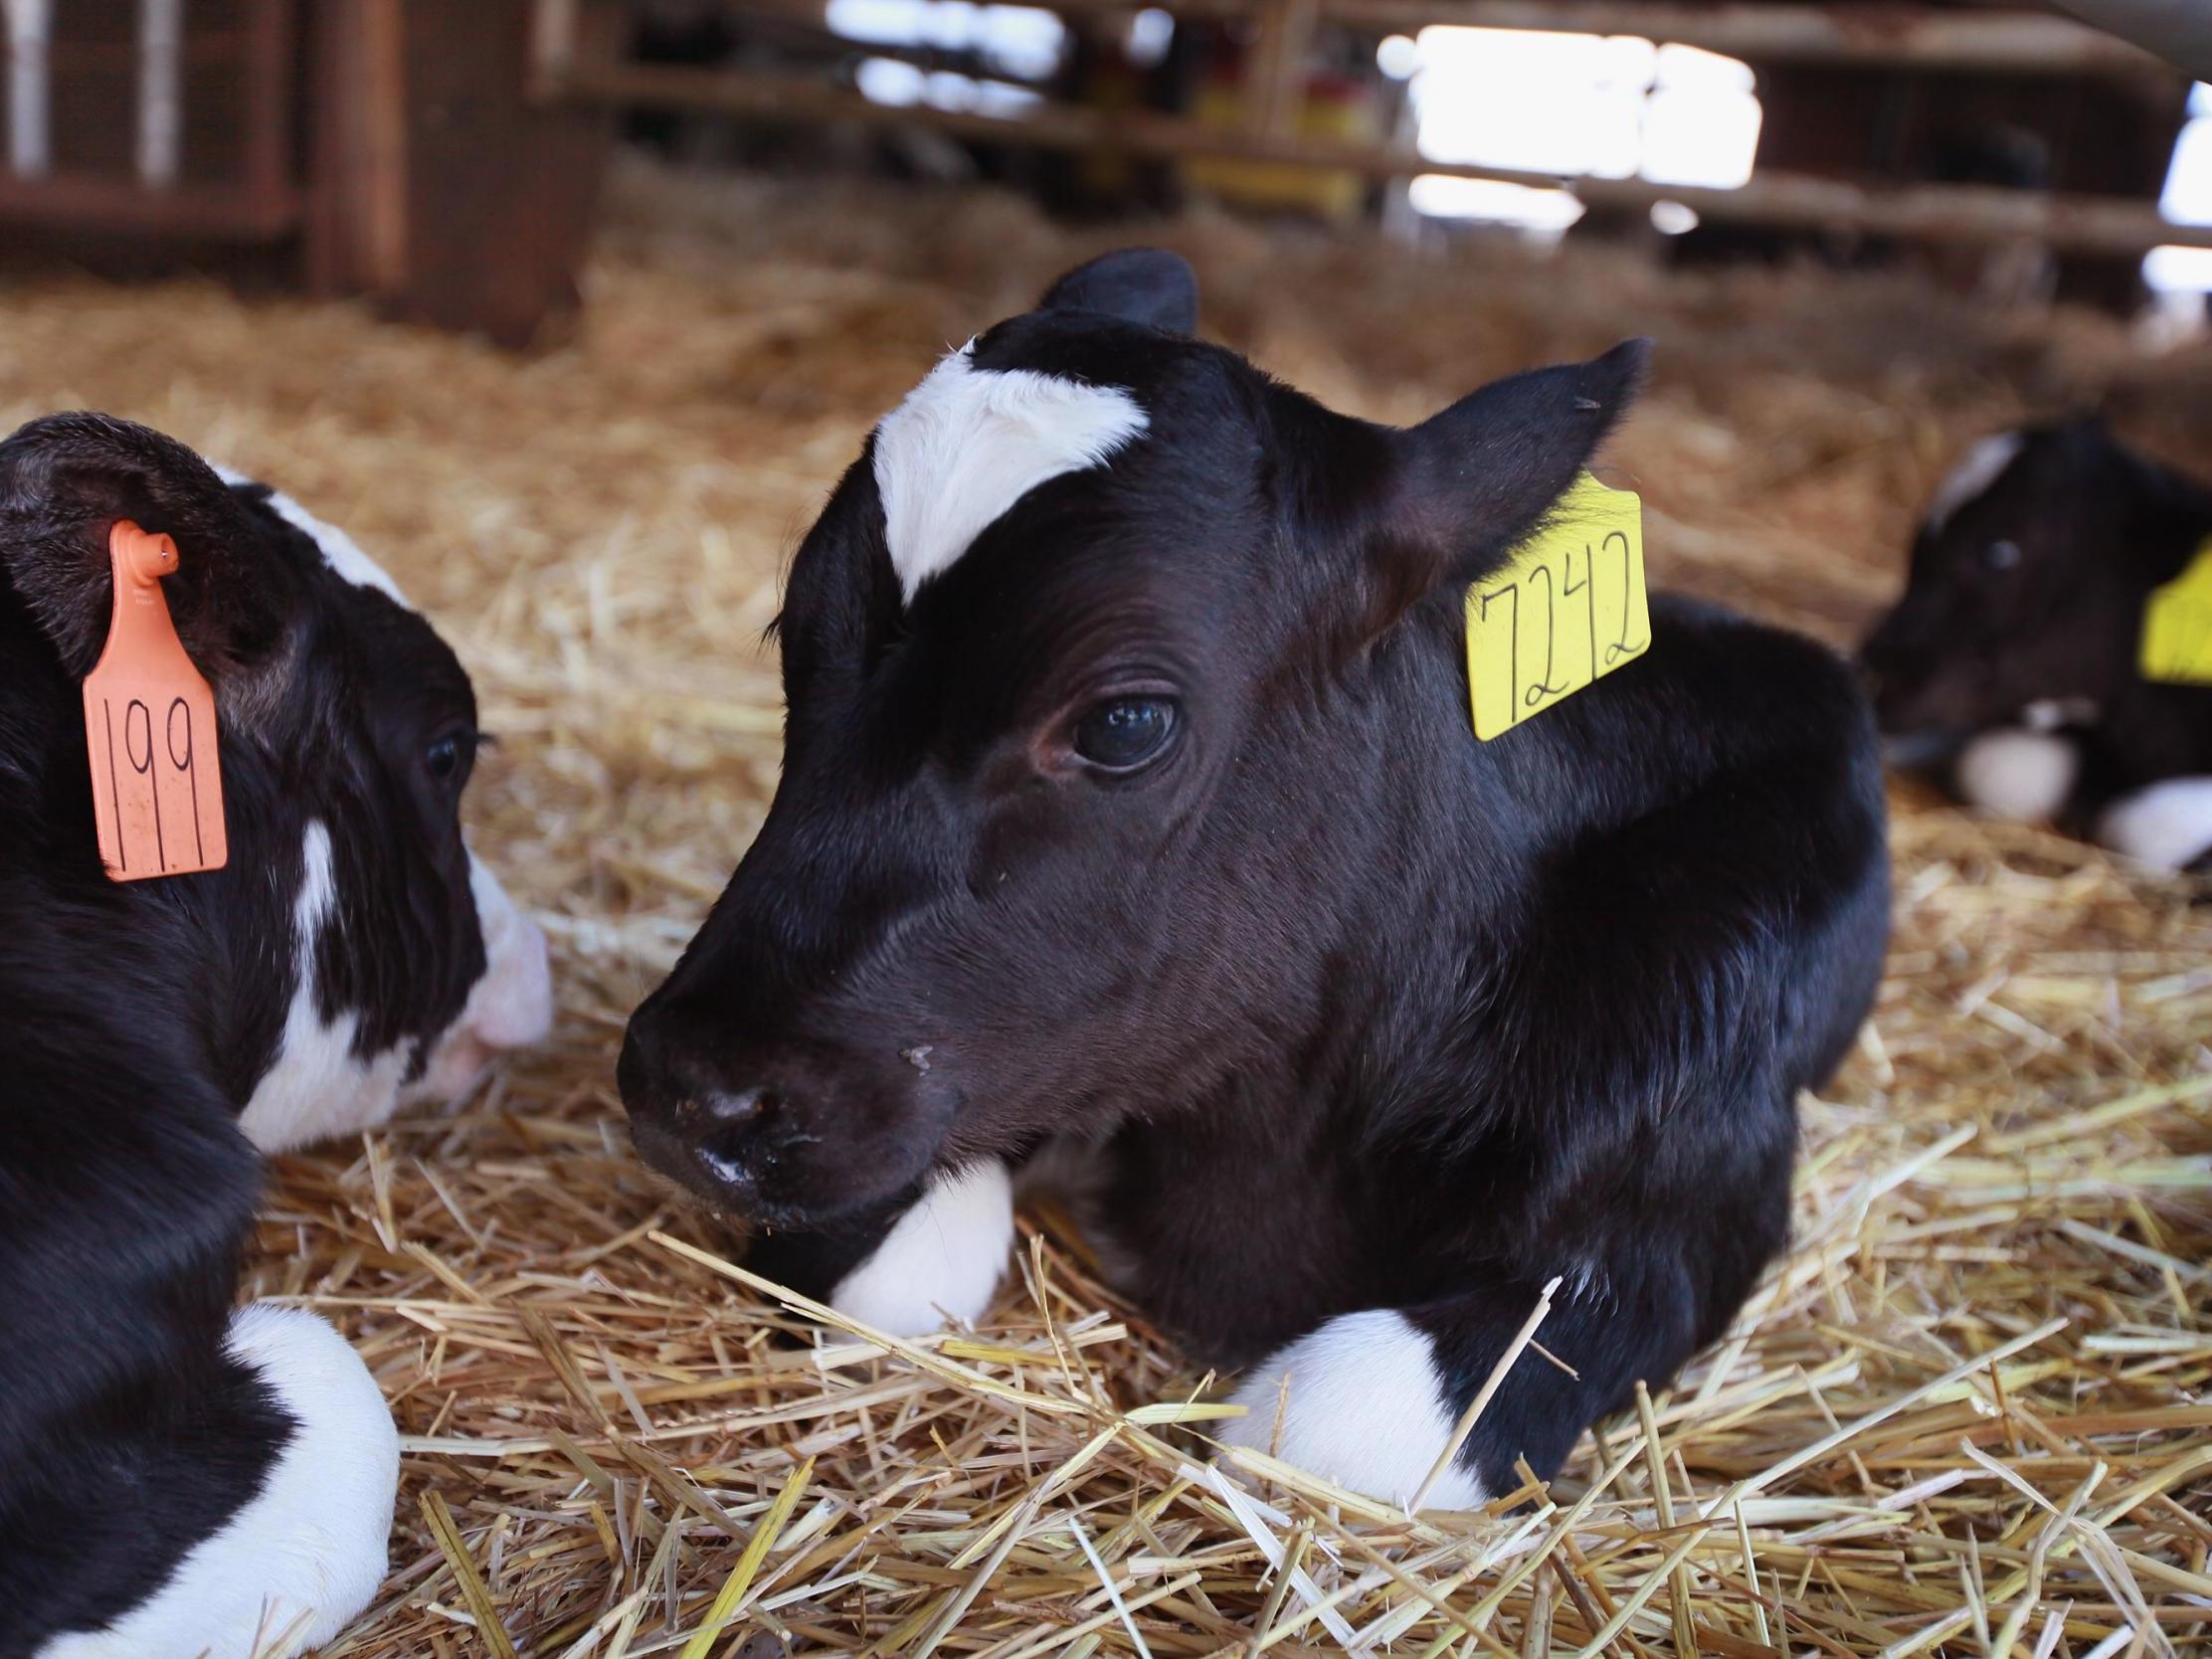 Male calves are considered surplus in the dairy industry while females are raised to have more calves